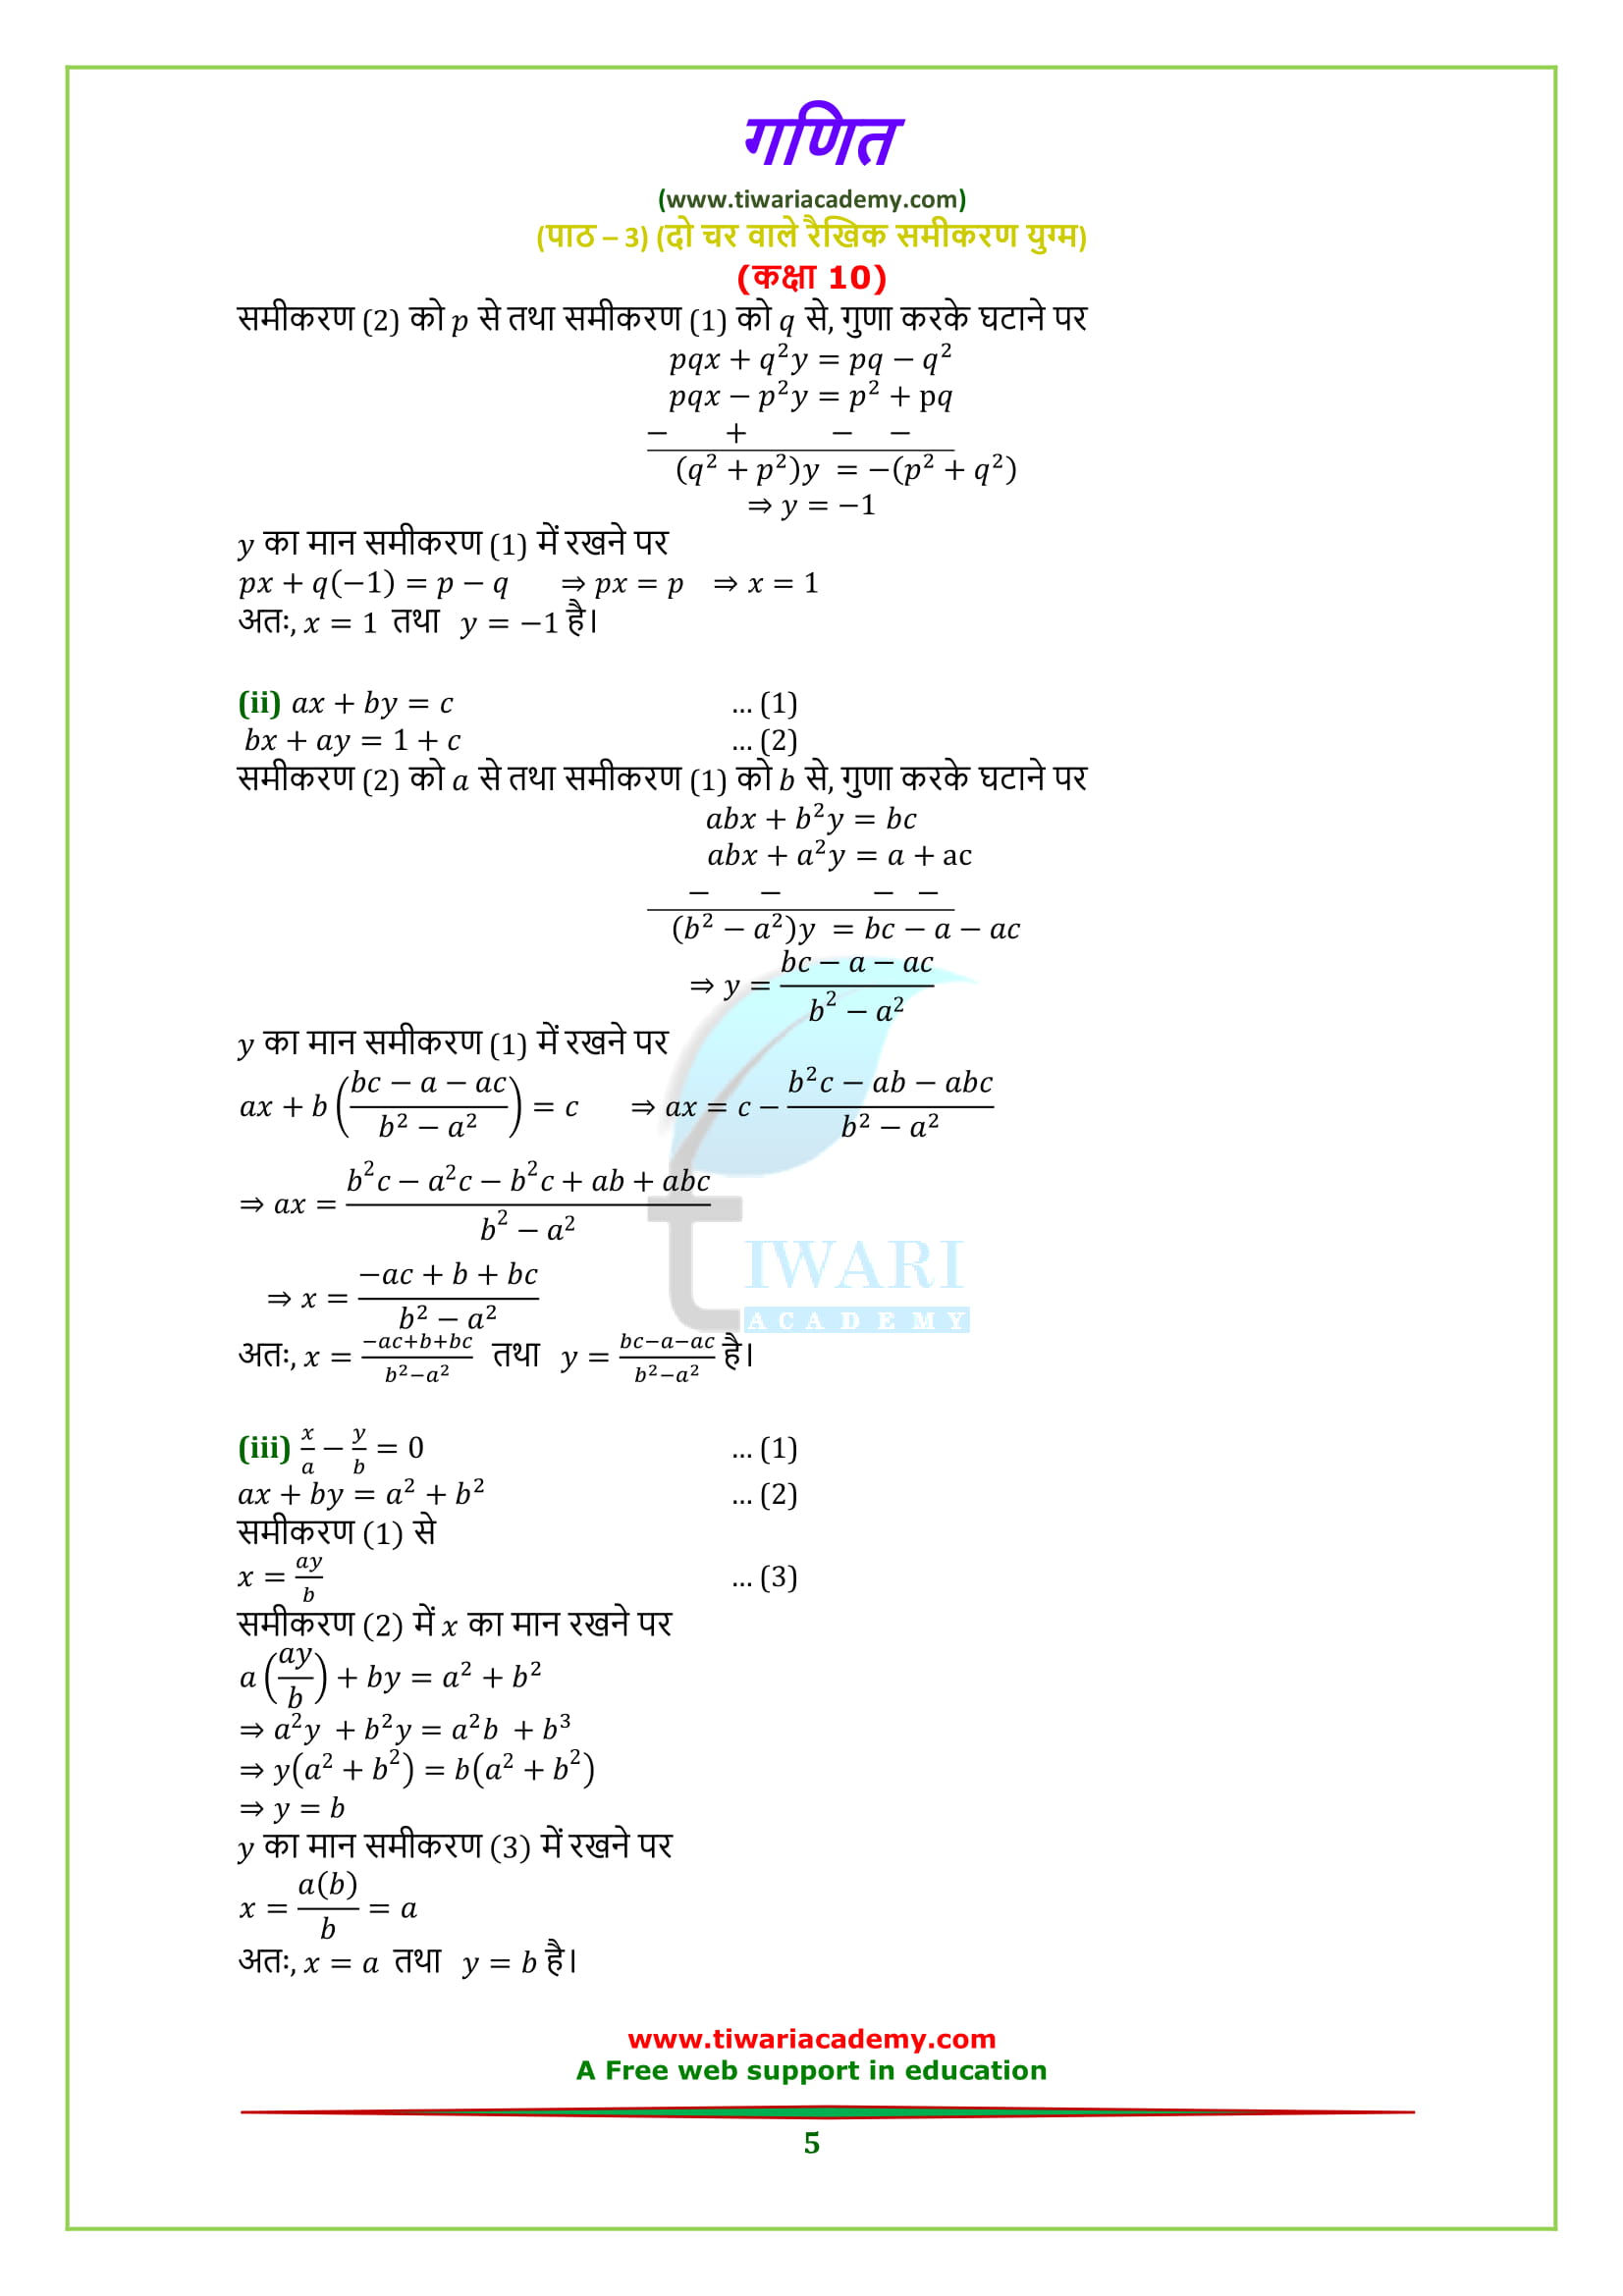 Class 10 maths chapter 3 optional exercise 3.7 solutions in pdf